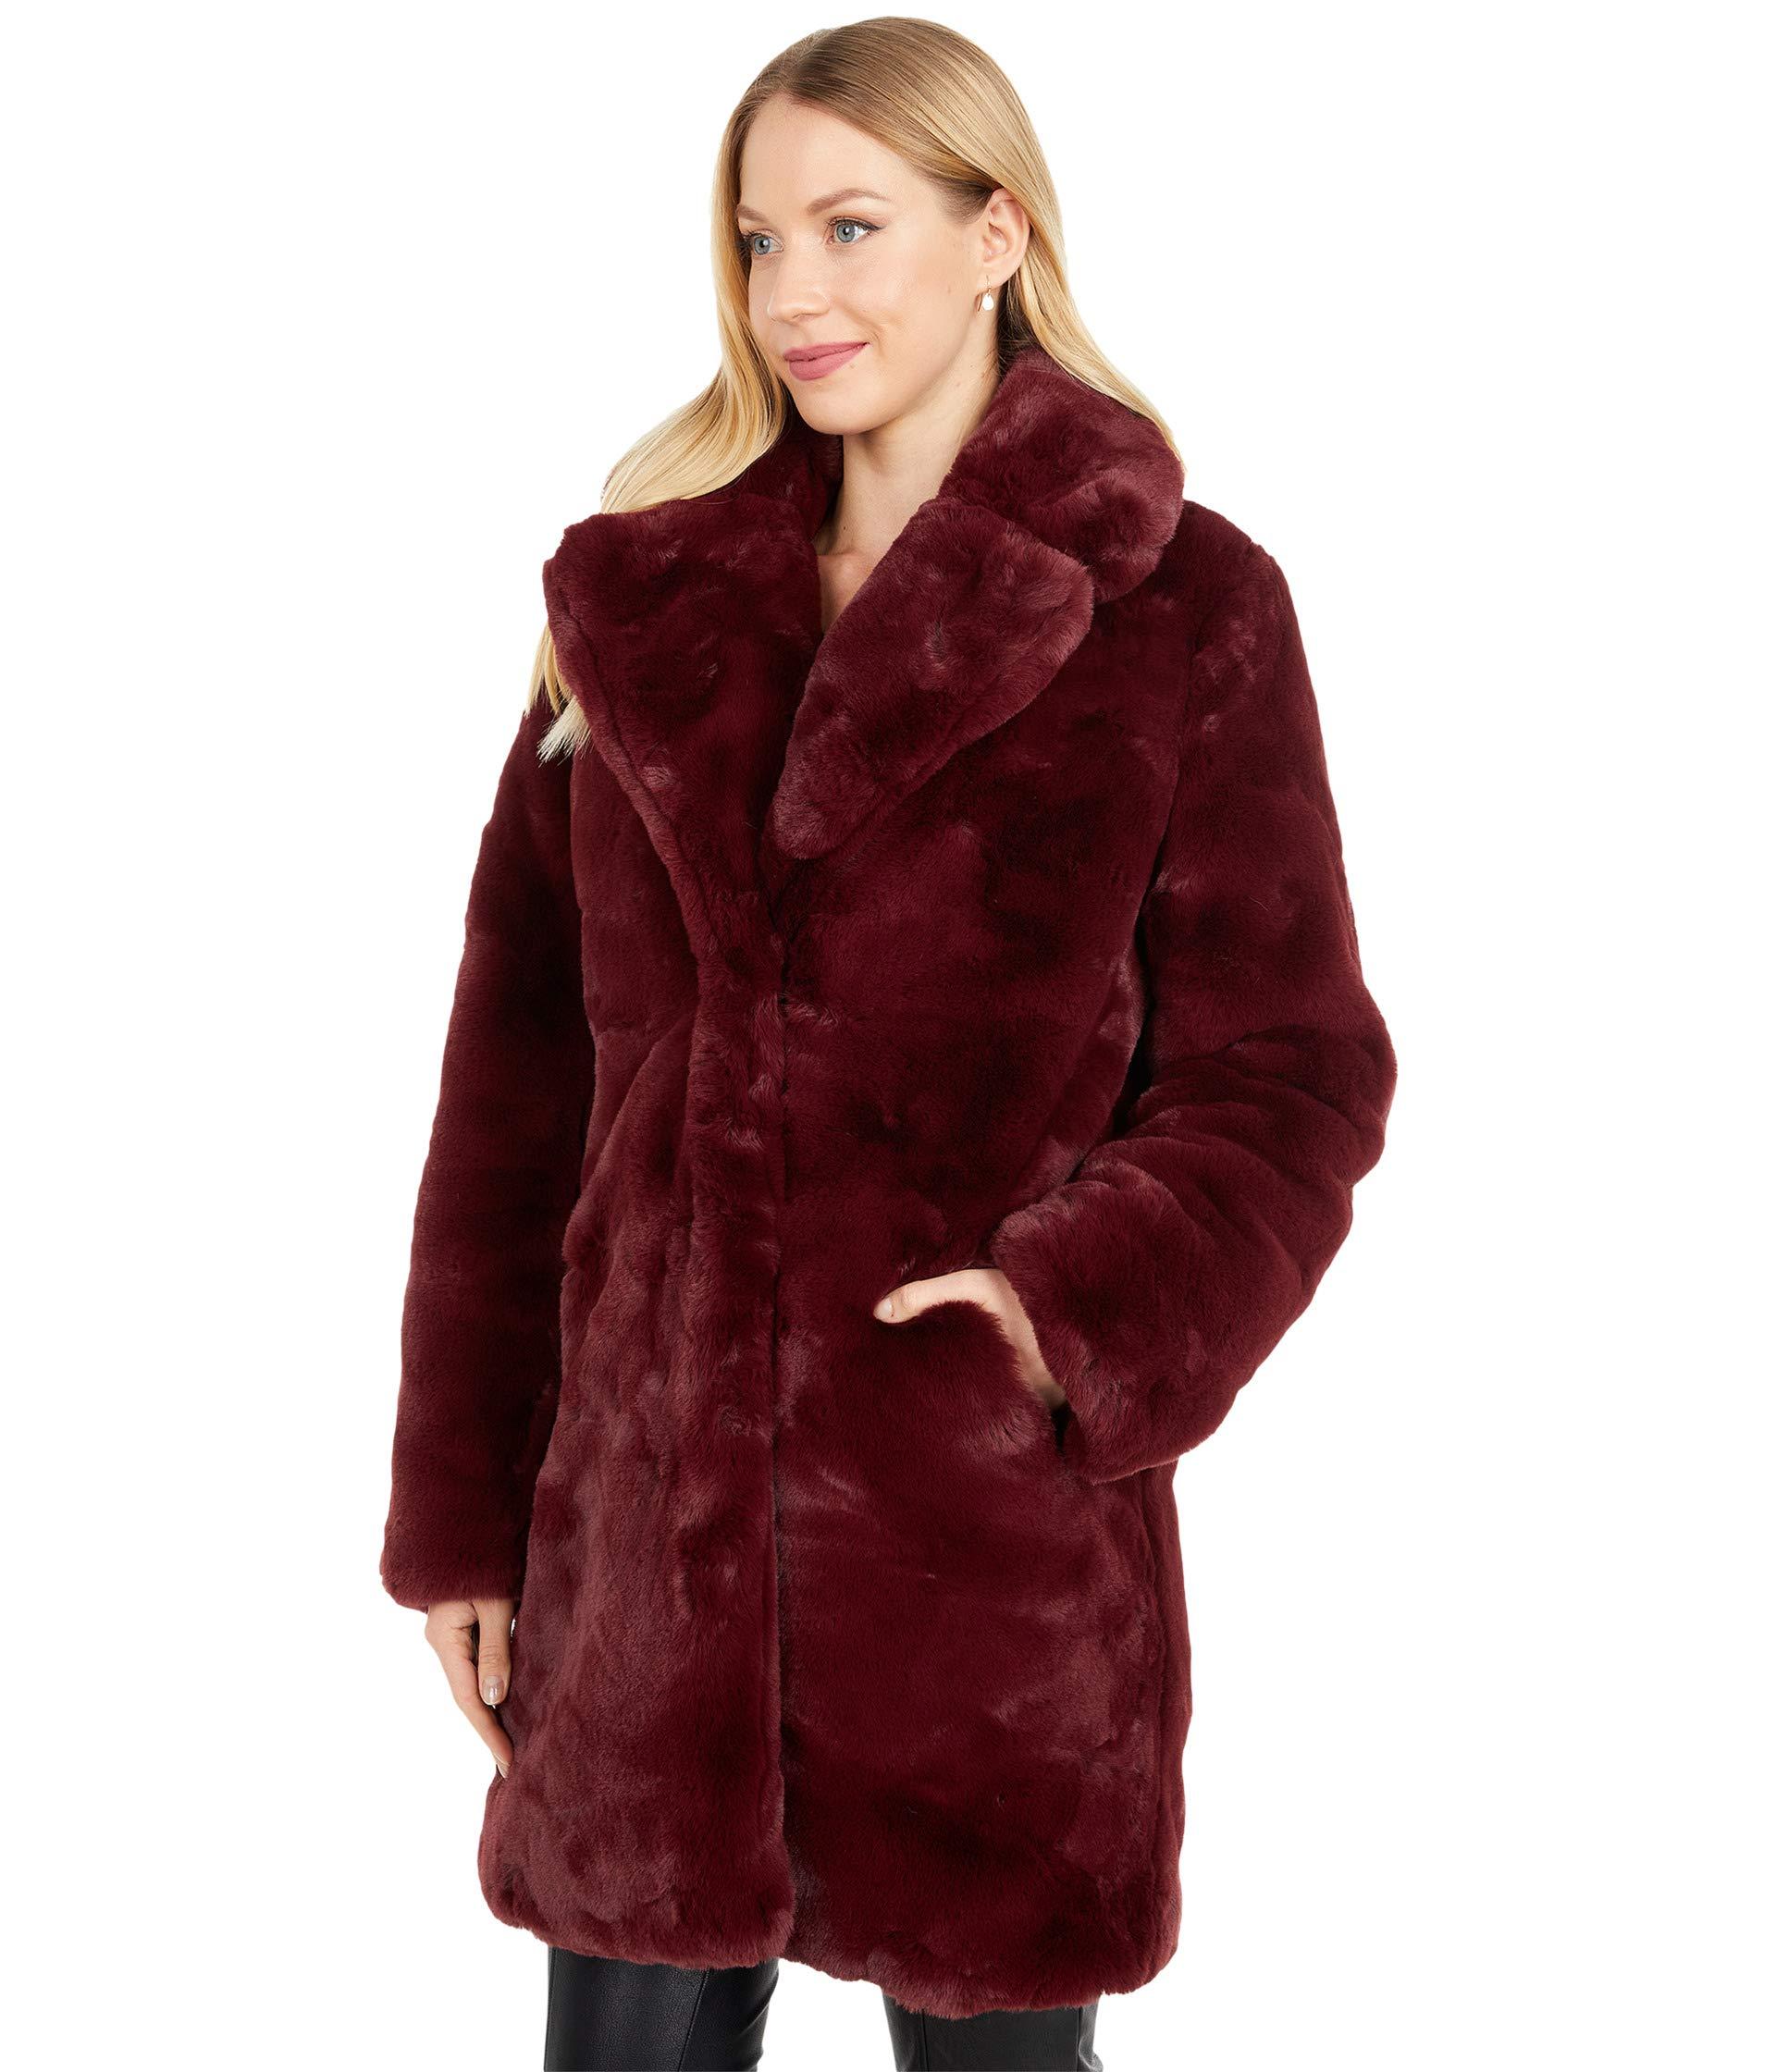 Apparis Sasha Long Faux Fur Coat With Collar in Red | Lyst